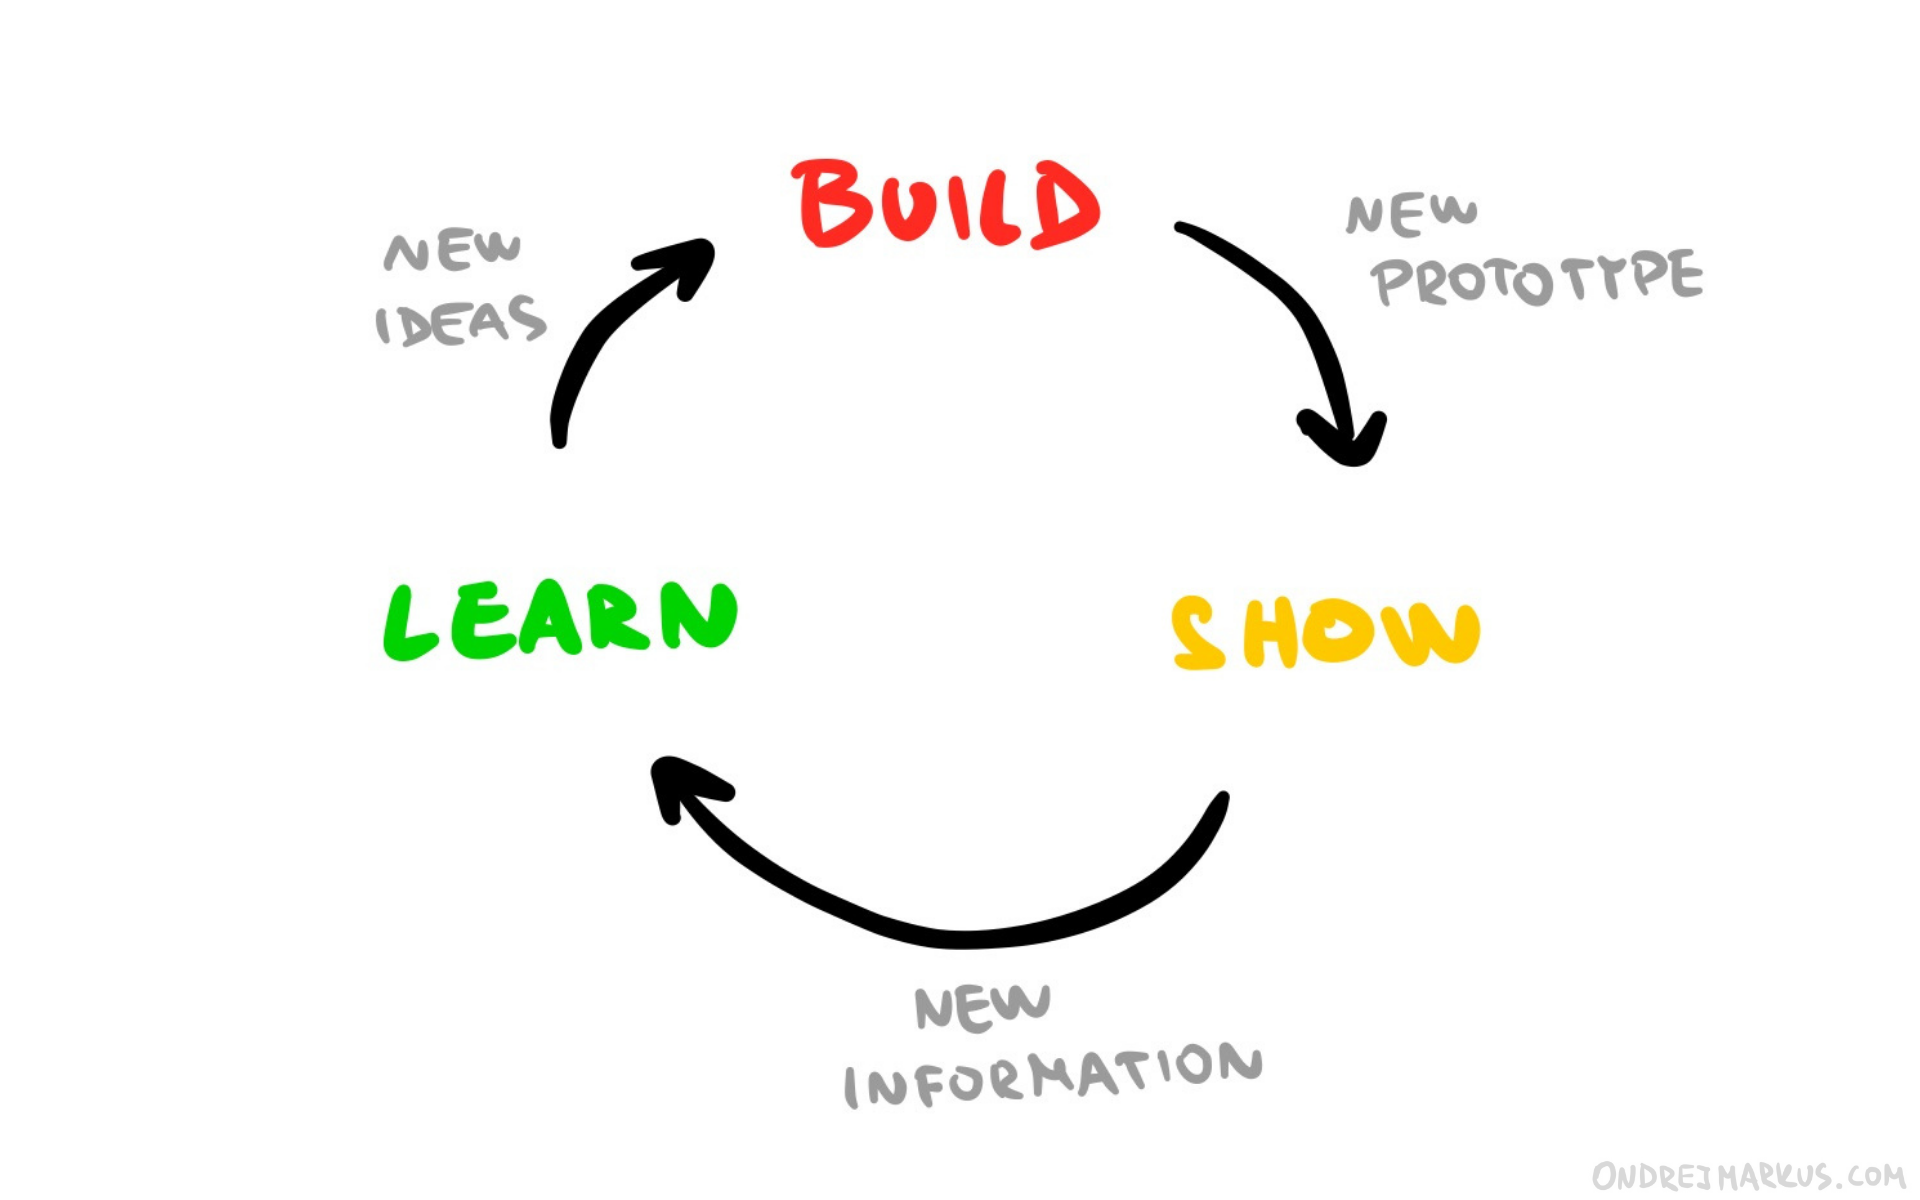 Build–Show–Learn feedback loop for building new products